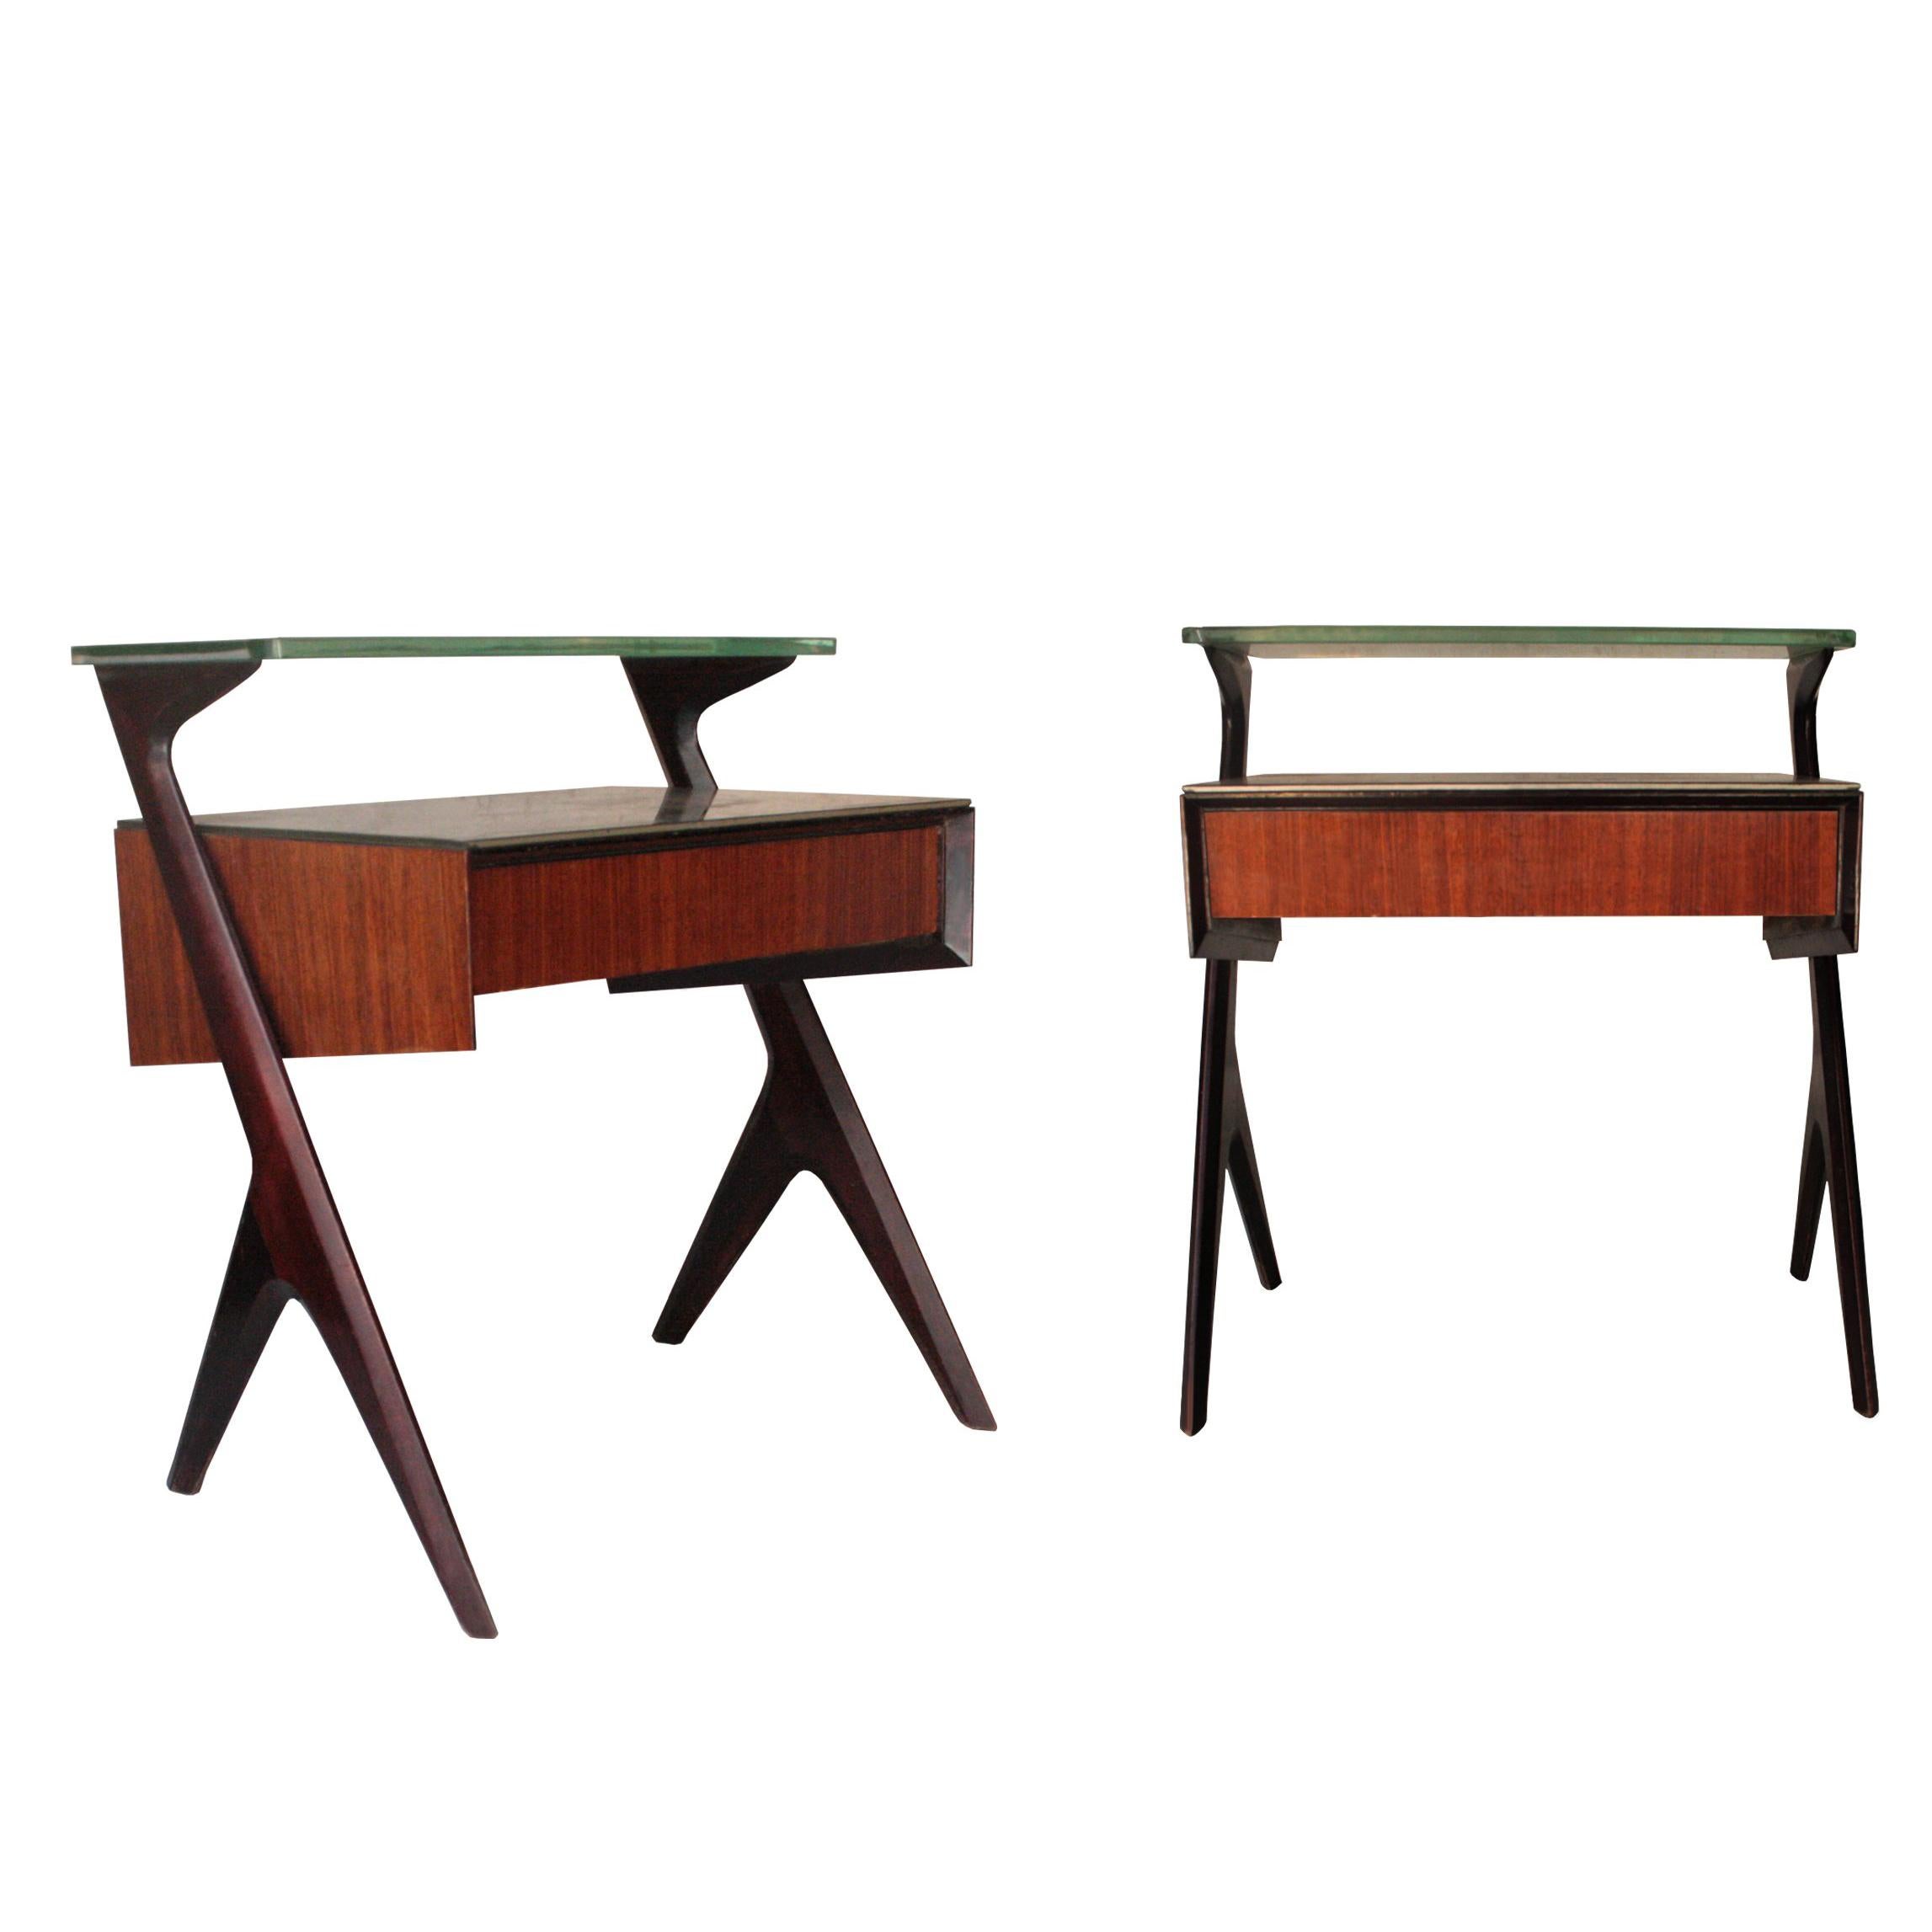 Midcentury Modern Brown Italian Pair of Bedside Tables. Italy, 1950